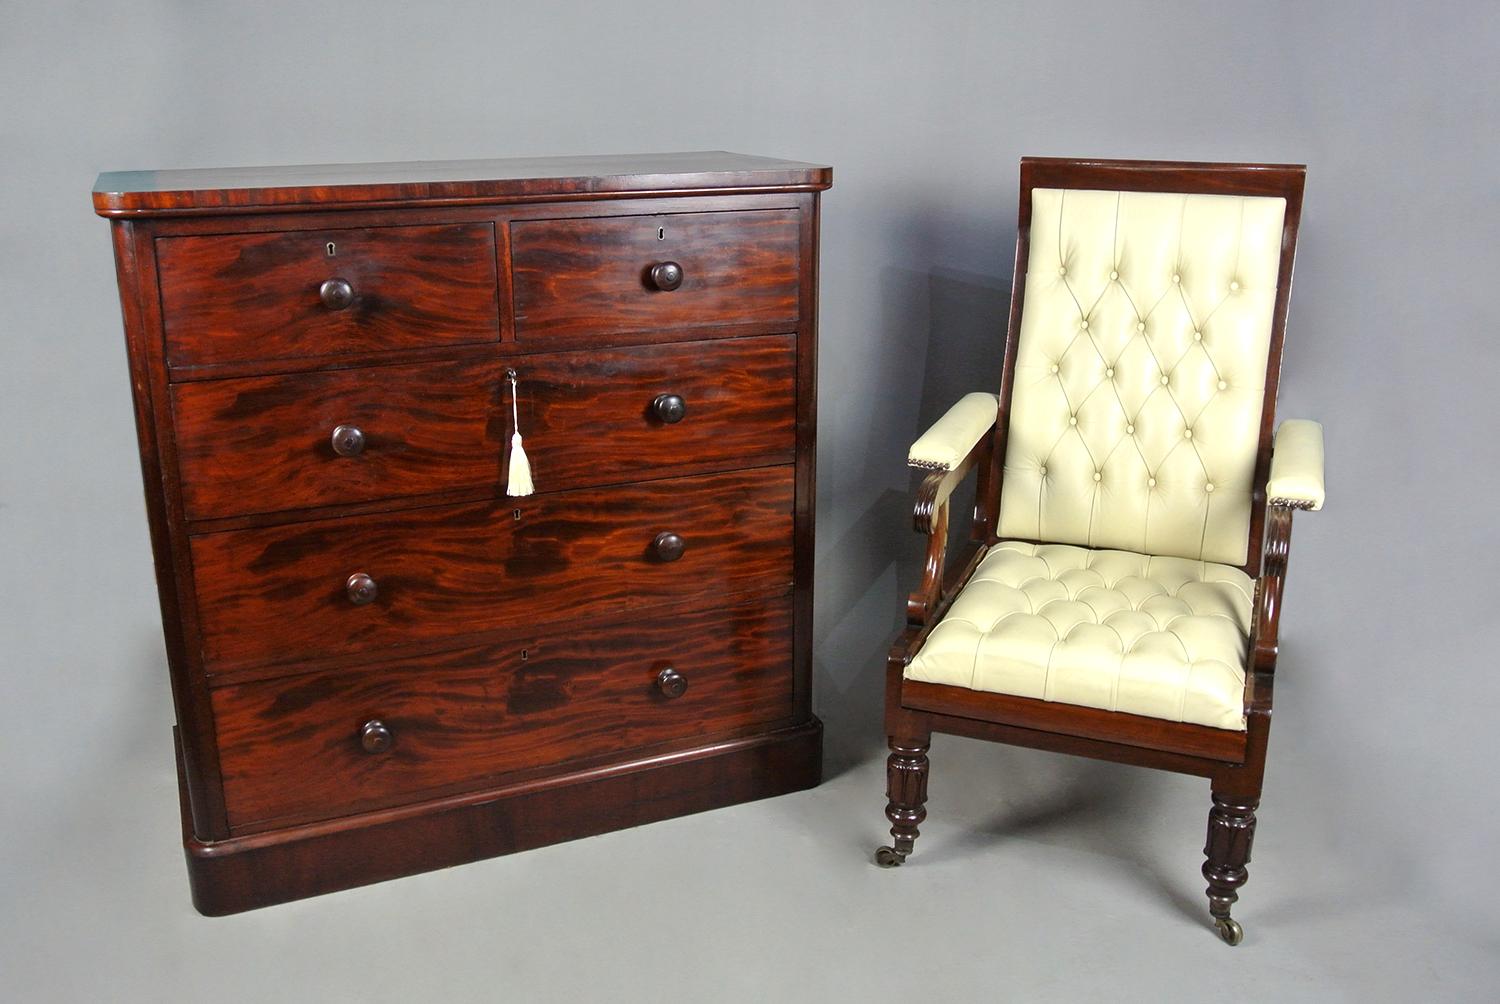 Mahogany Superb Holland & Sons Chest of Drawers c. 1870